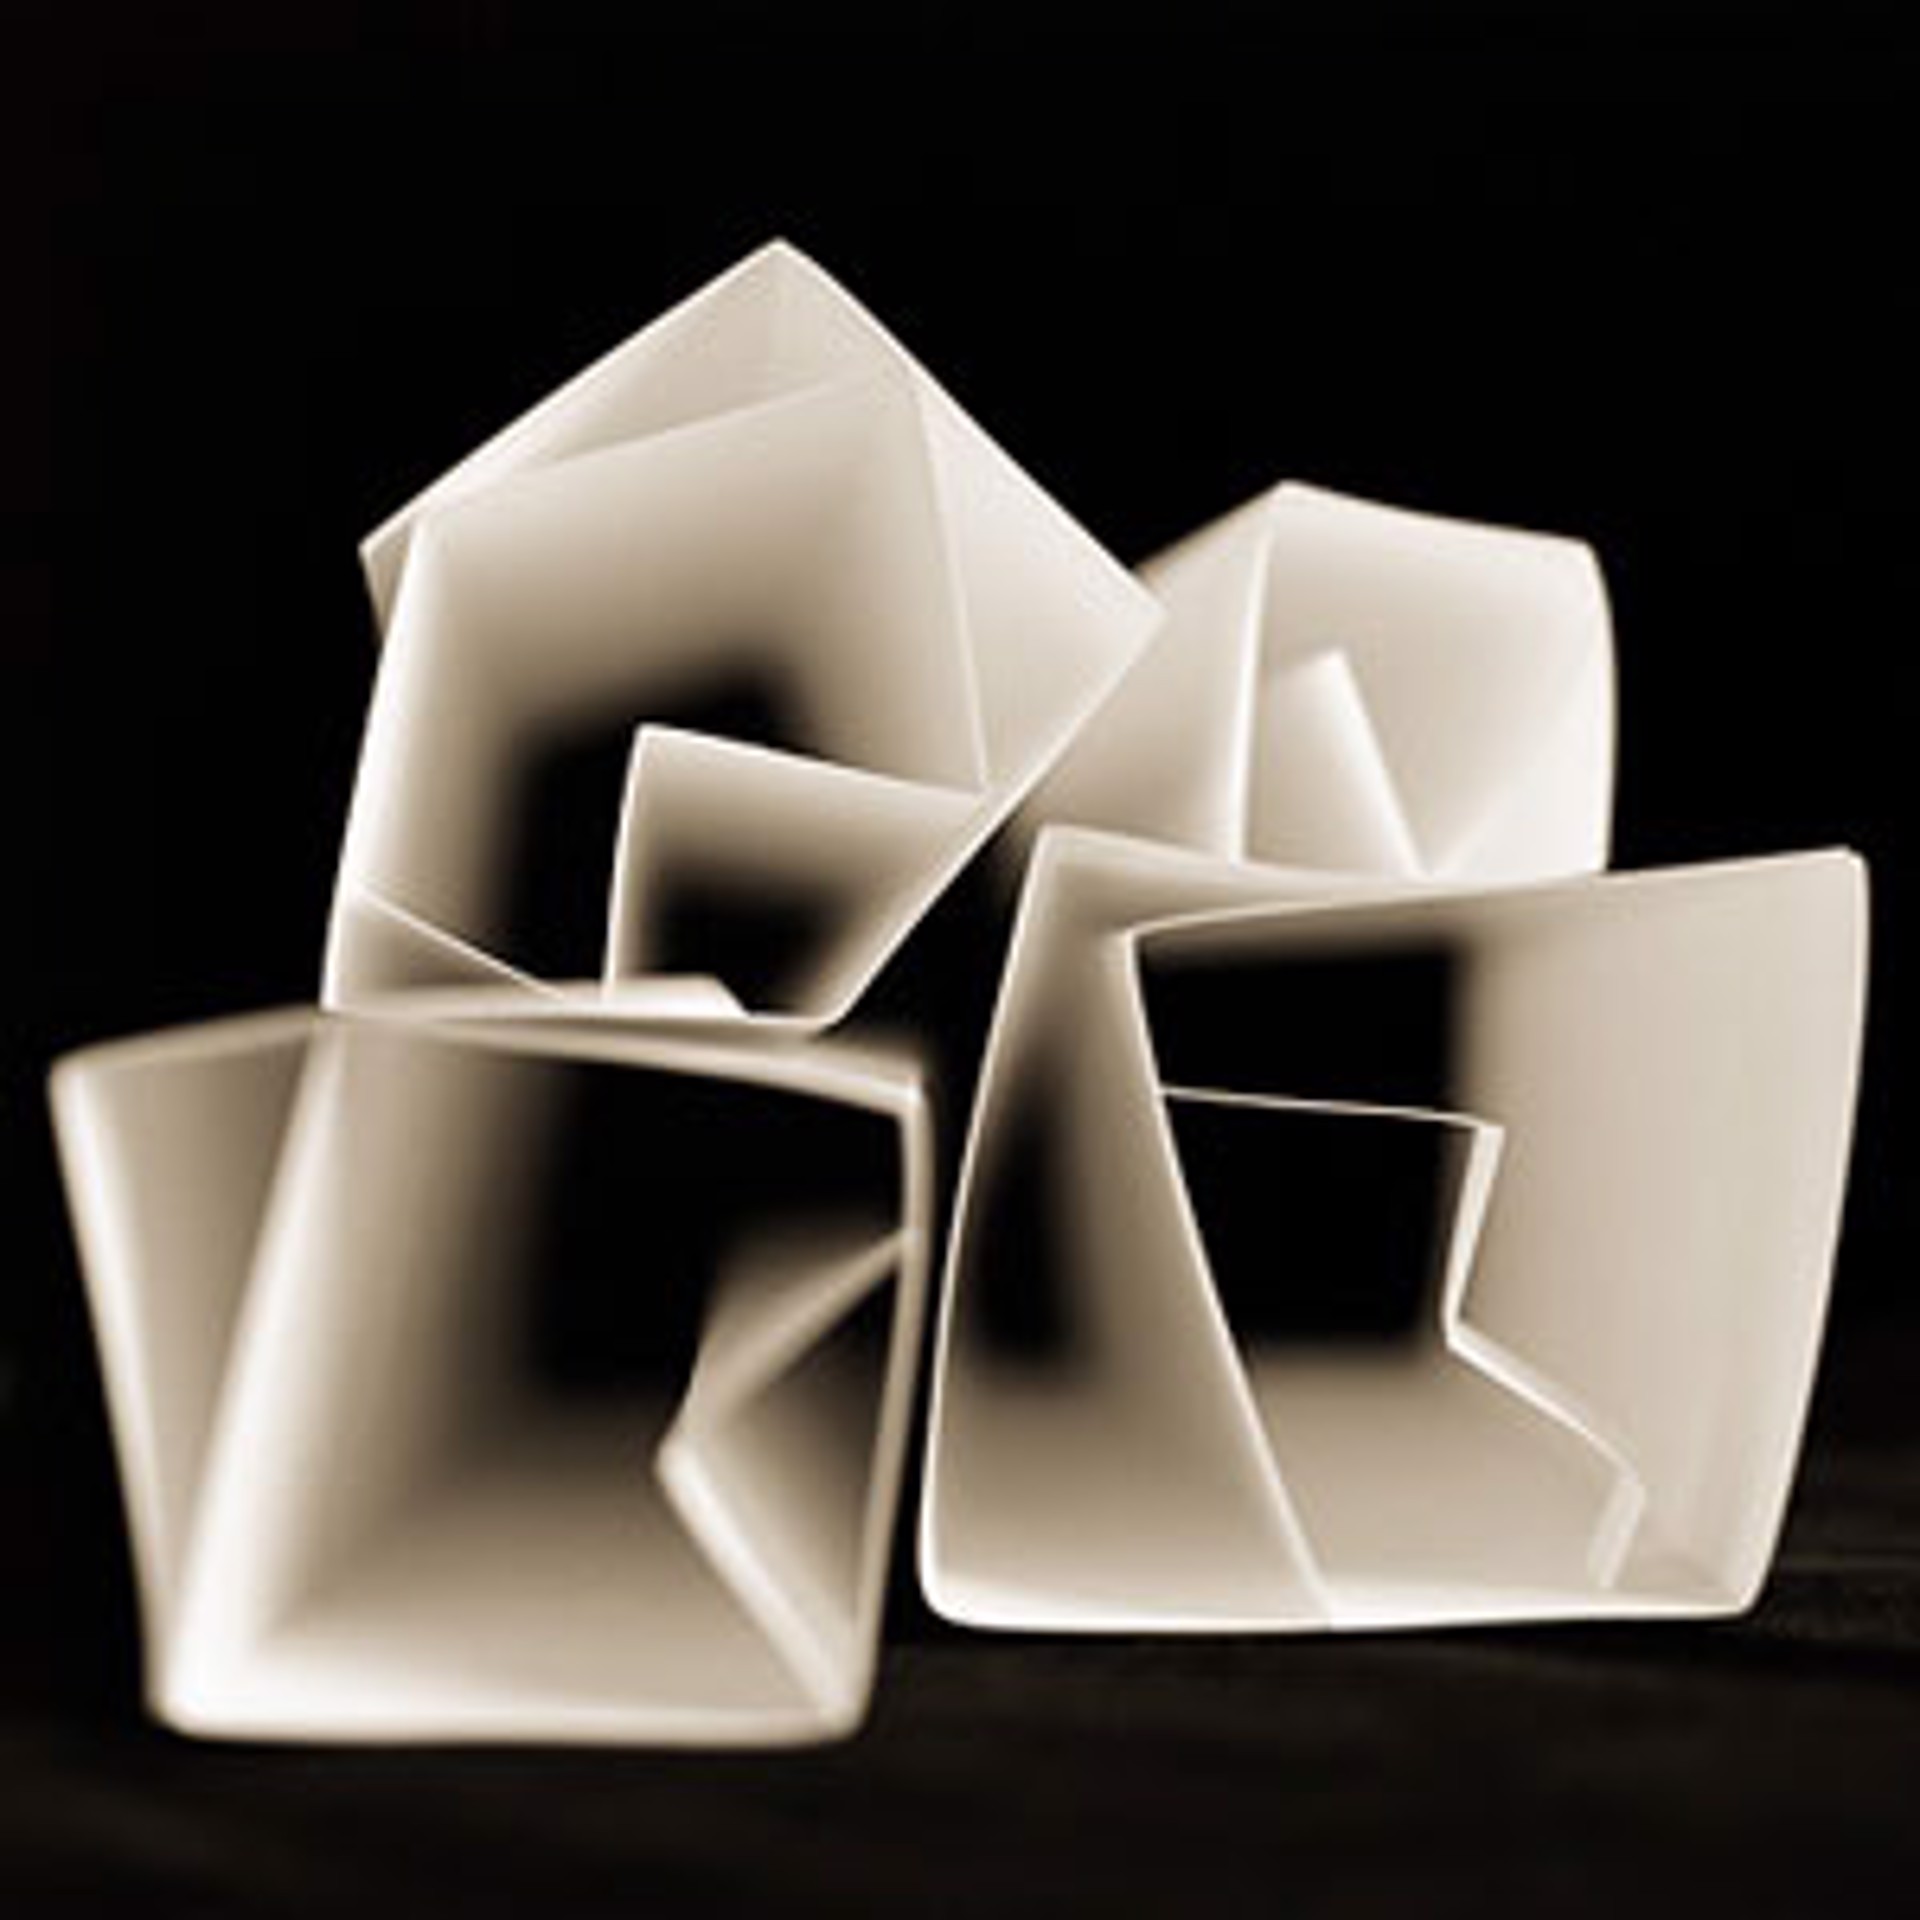 Paper Structure #3 by Andrew Sovjani